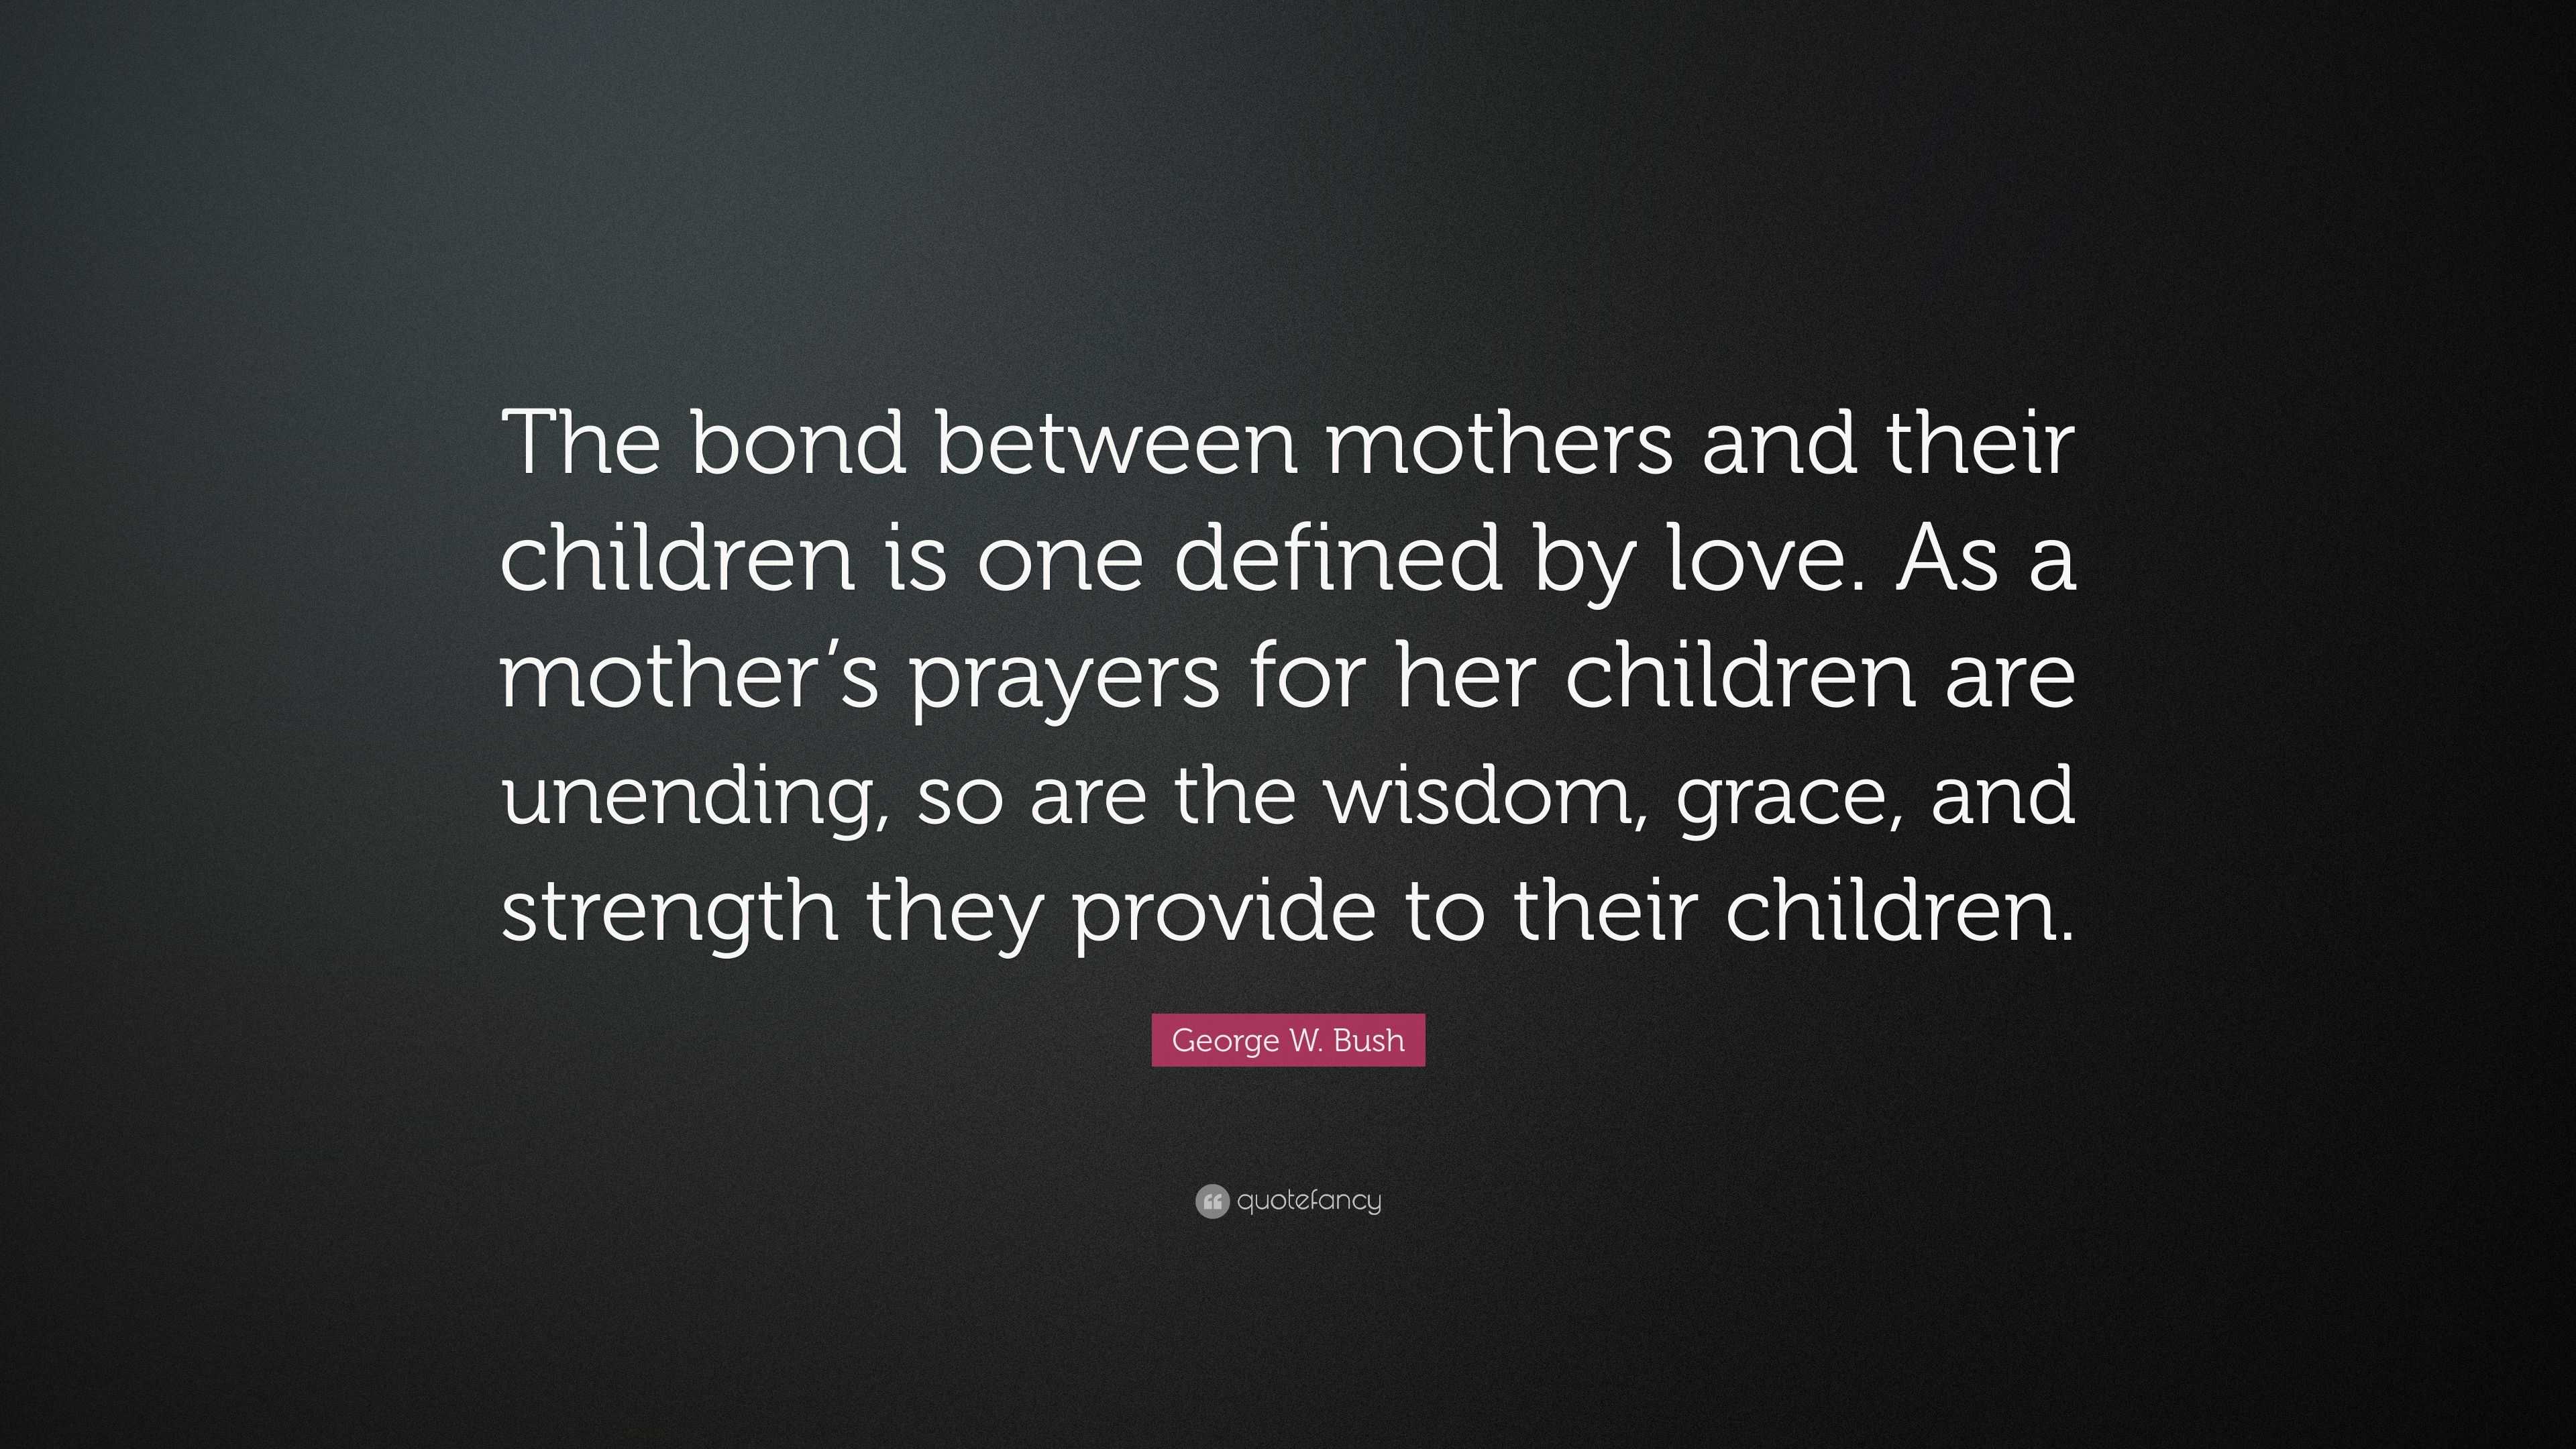 George W Bush Quote “The bond between mothers and their children is one